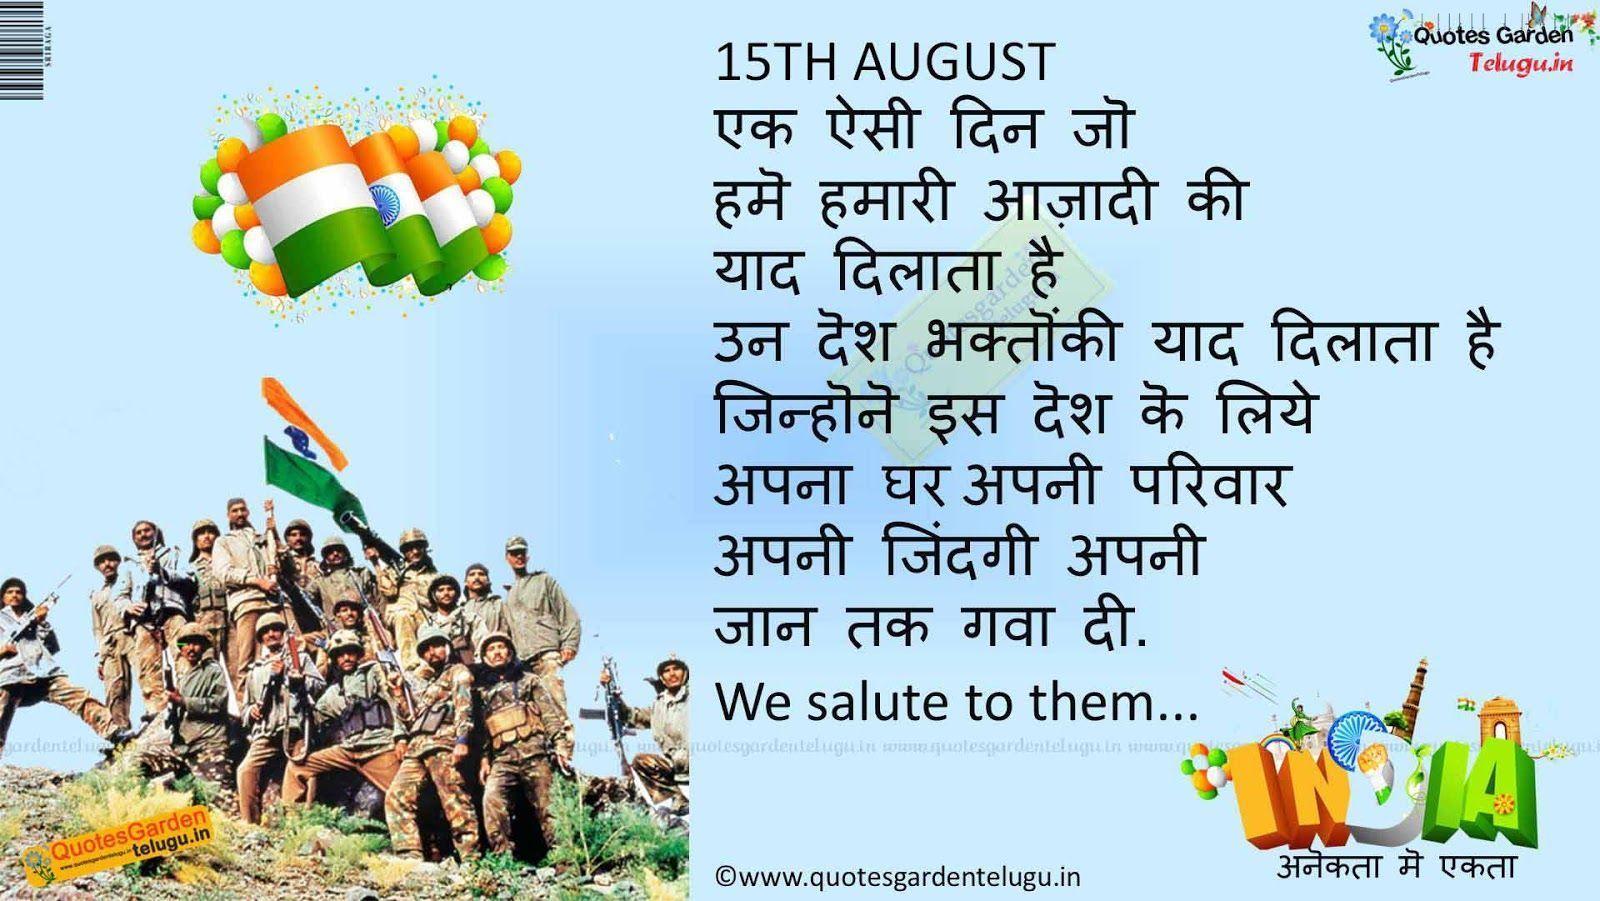 15th august Independenceday Quotes in Hindi 849. QUOTES GARDEN